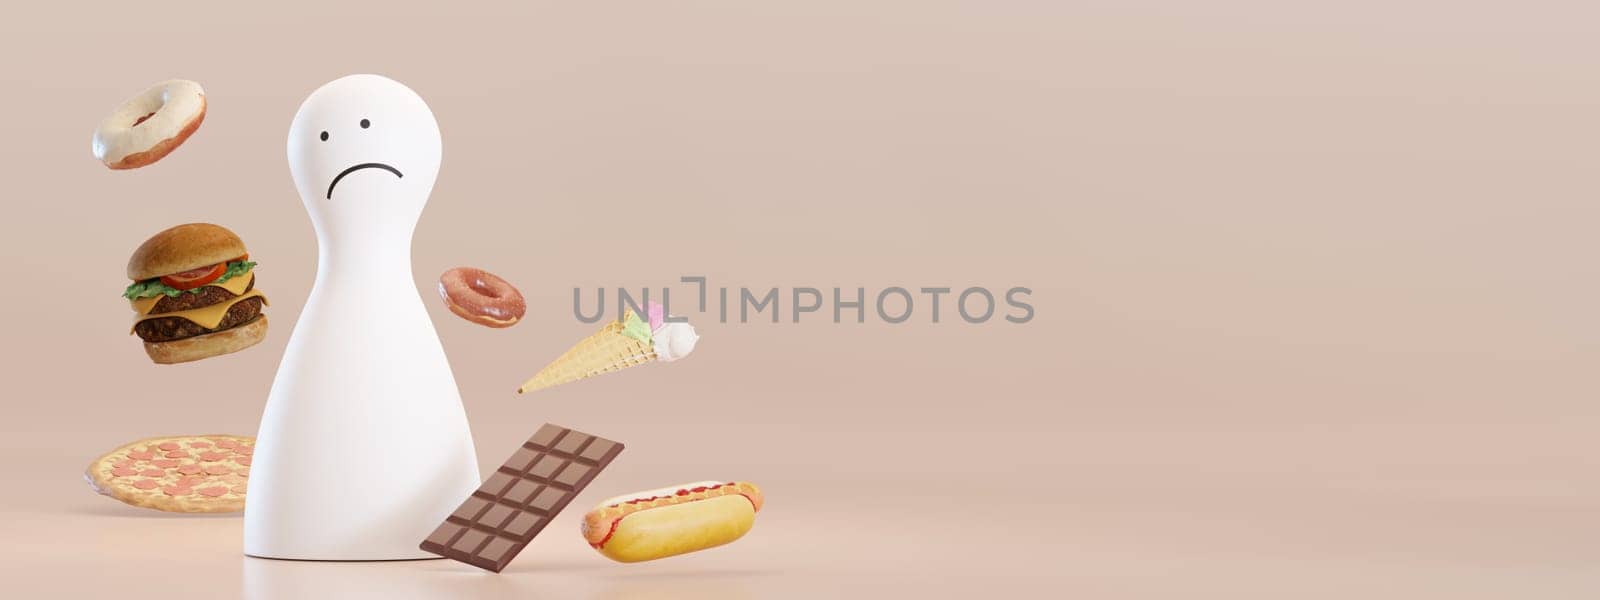 Sad, depressed person and unhealthy fast food. Banner with copy space. Problems with weight. Confusion, anxiety. Worrying about body shape. Diet. Try to be fit, lose weight. Eat unhealthy. 3D render